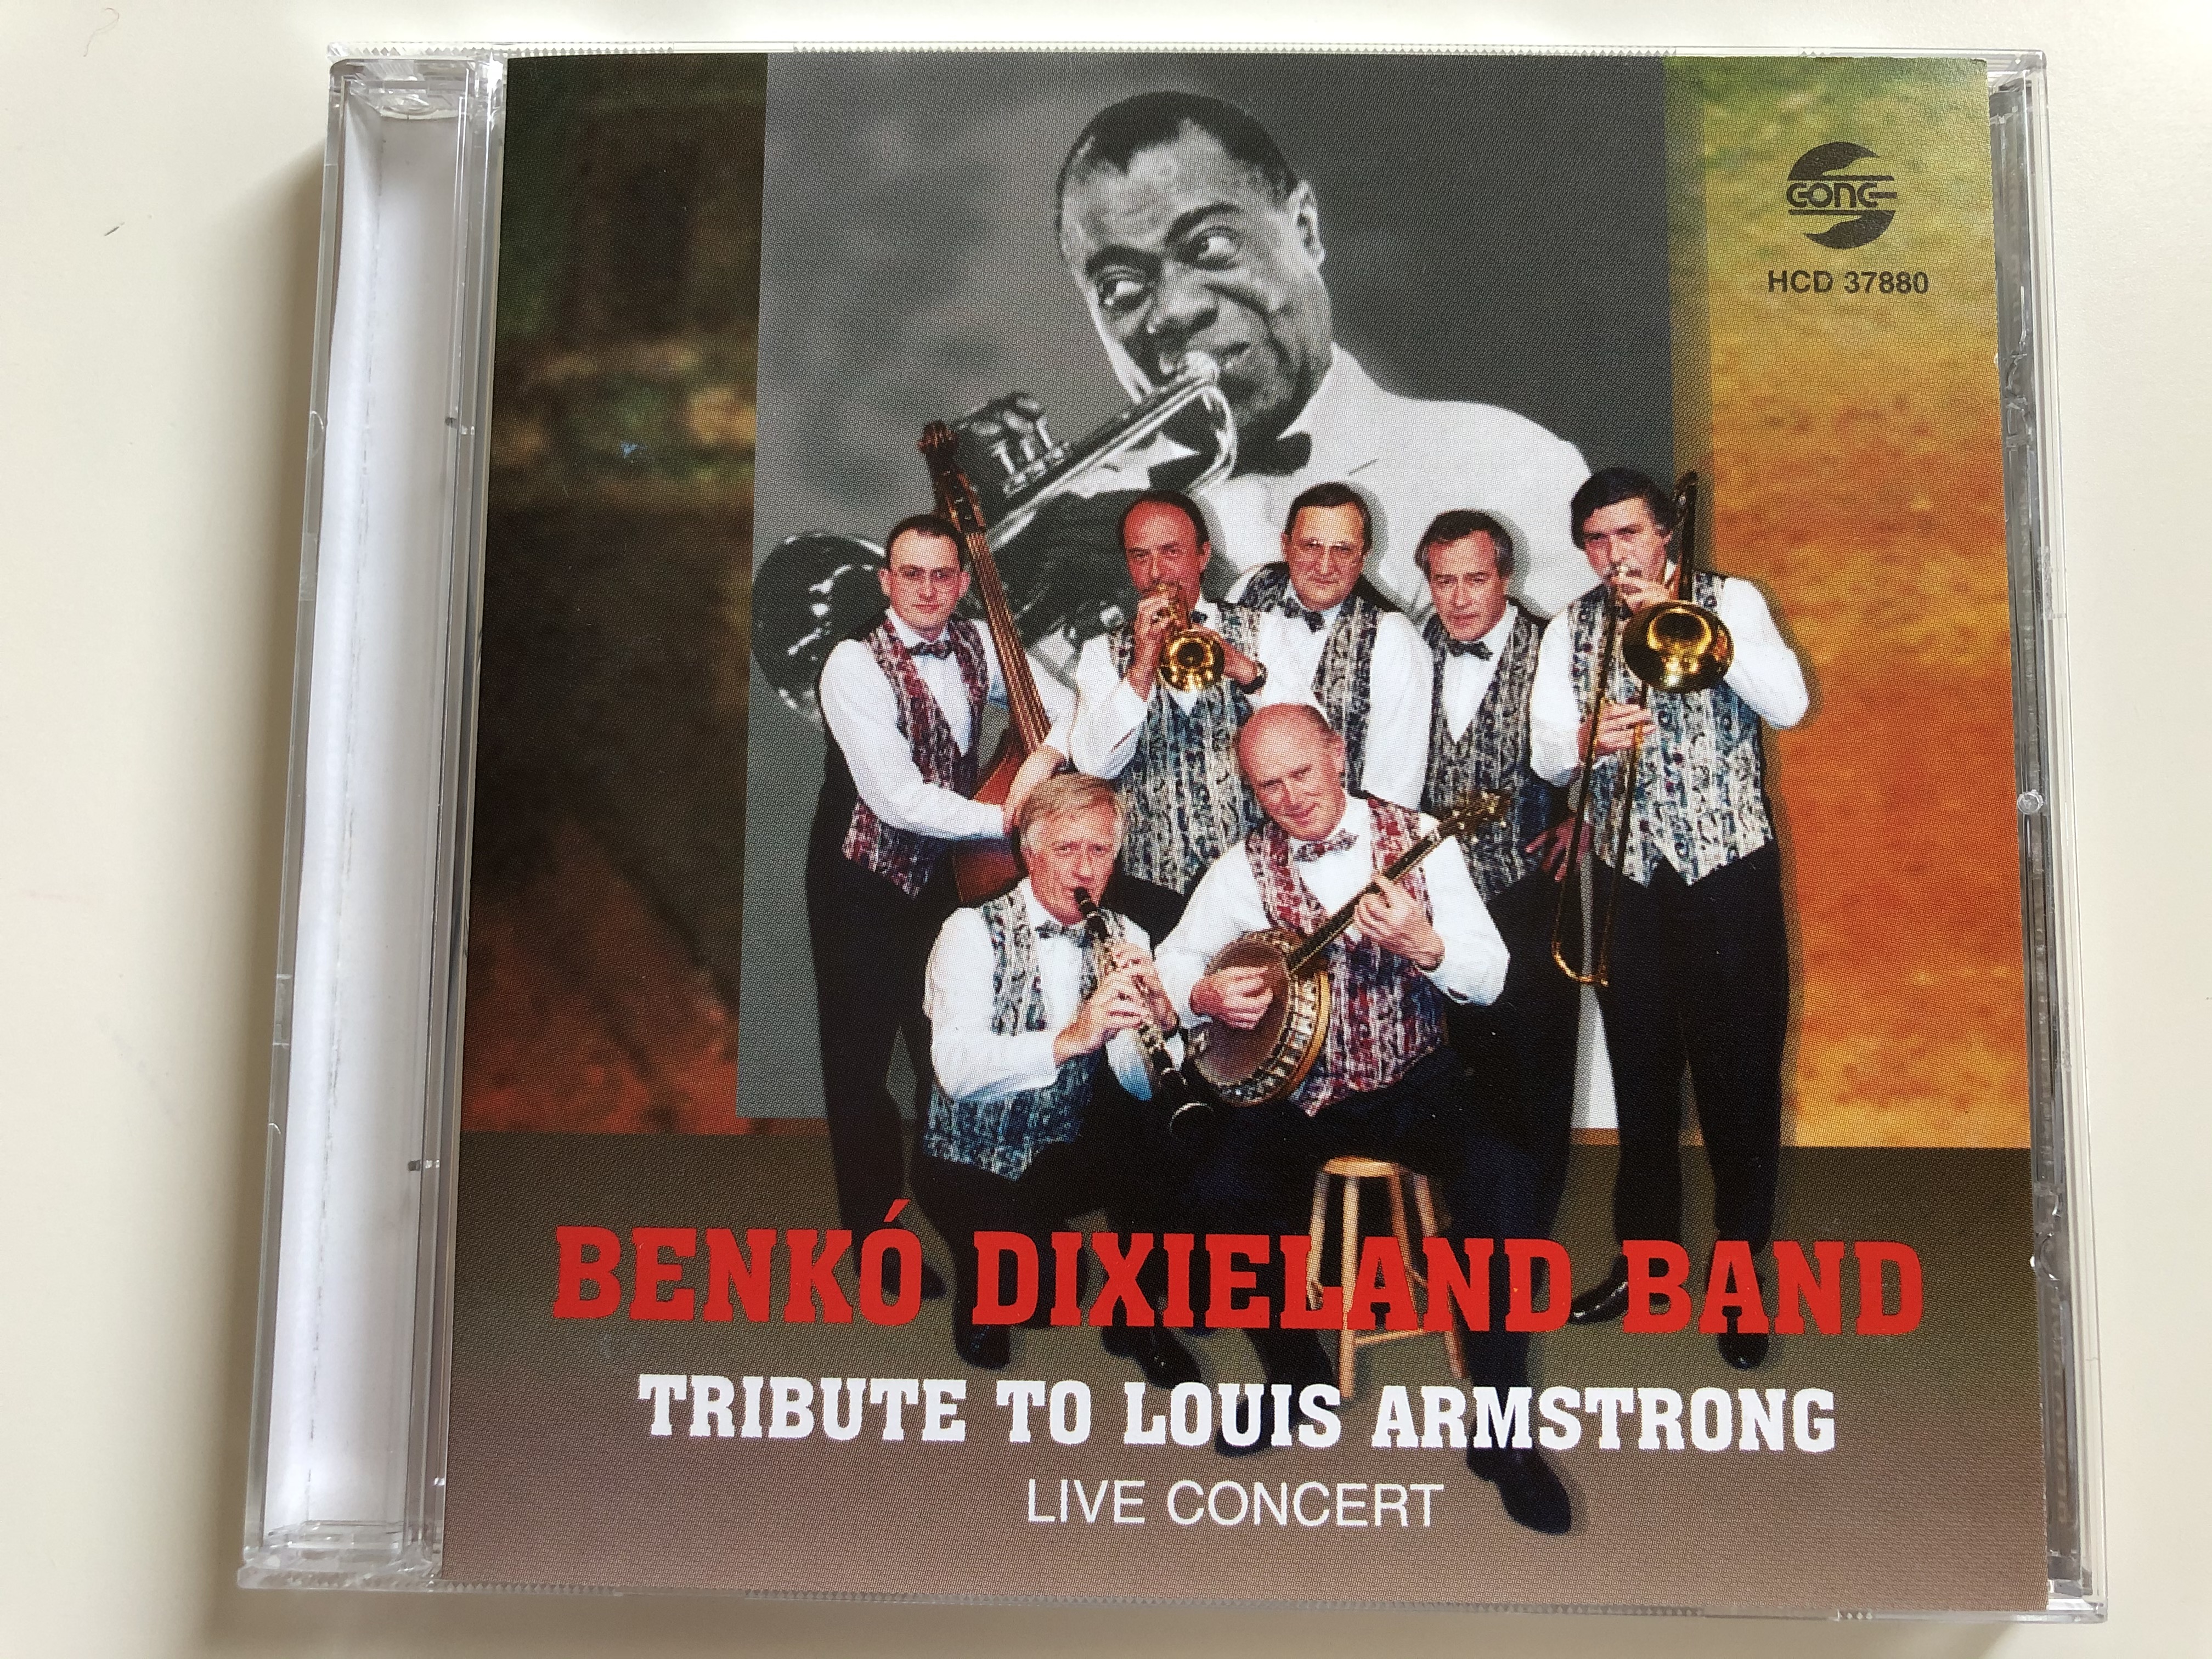 benko-dixieland-band-tribute-to-louis-armstrong-live-concert-gong-audio-cd-1997-hcd-37880-1-.jpg